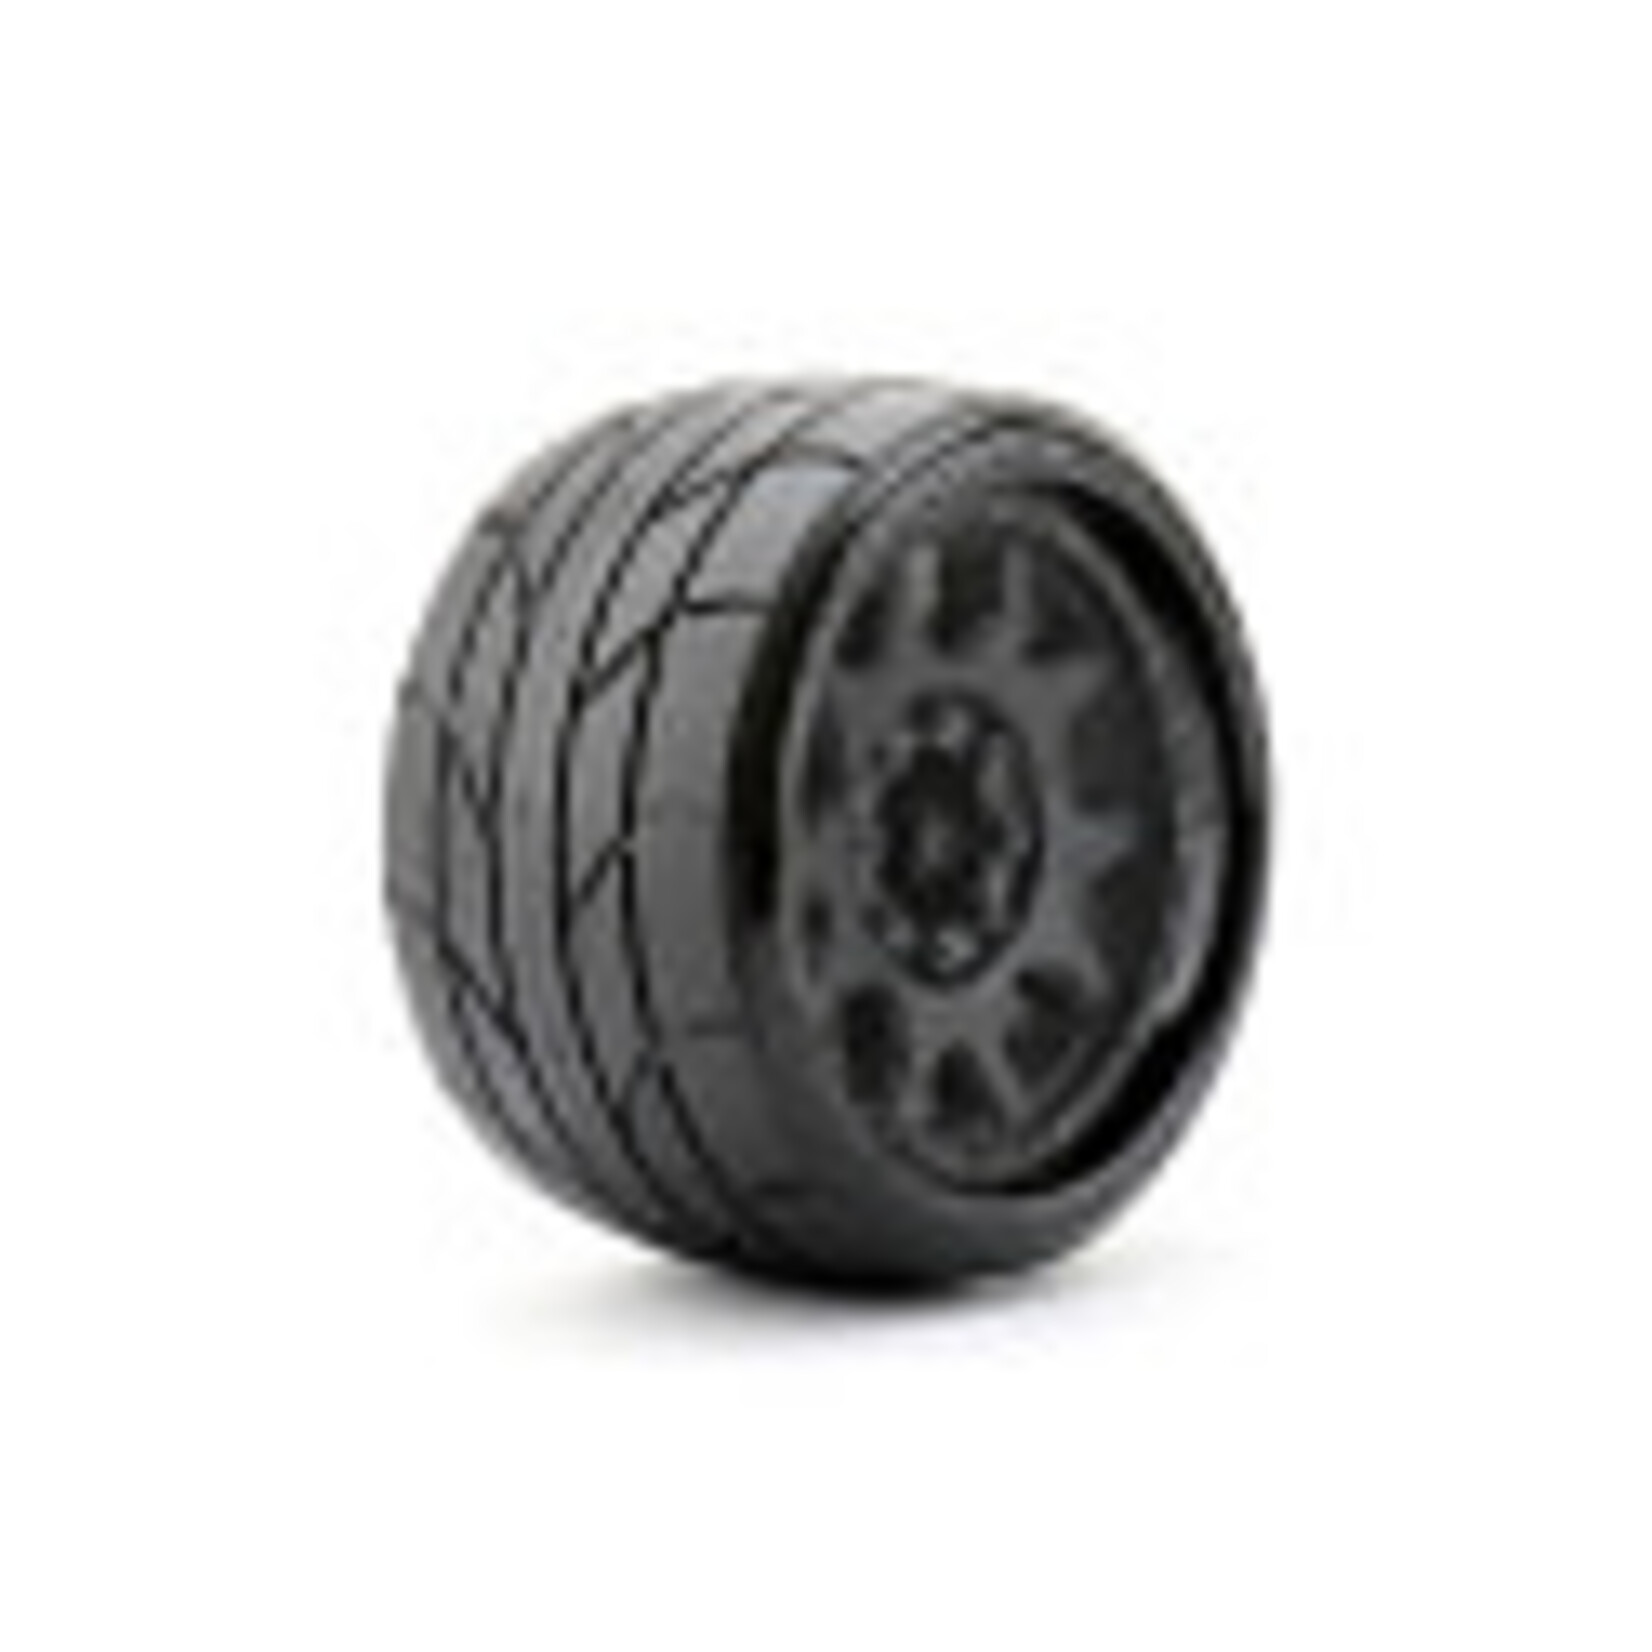 Jetko Tires JKO1604CBMSGBB2  1/8 SGT 3.8 Super Sonic Tires Mounted on Black Claw Rims, Medium Soft, Belted, 17mm 1/2" Offset (2) 17mm 1/2 0ffset Wide (for Traxxas Maxx)